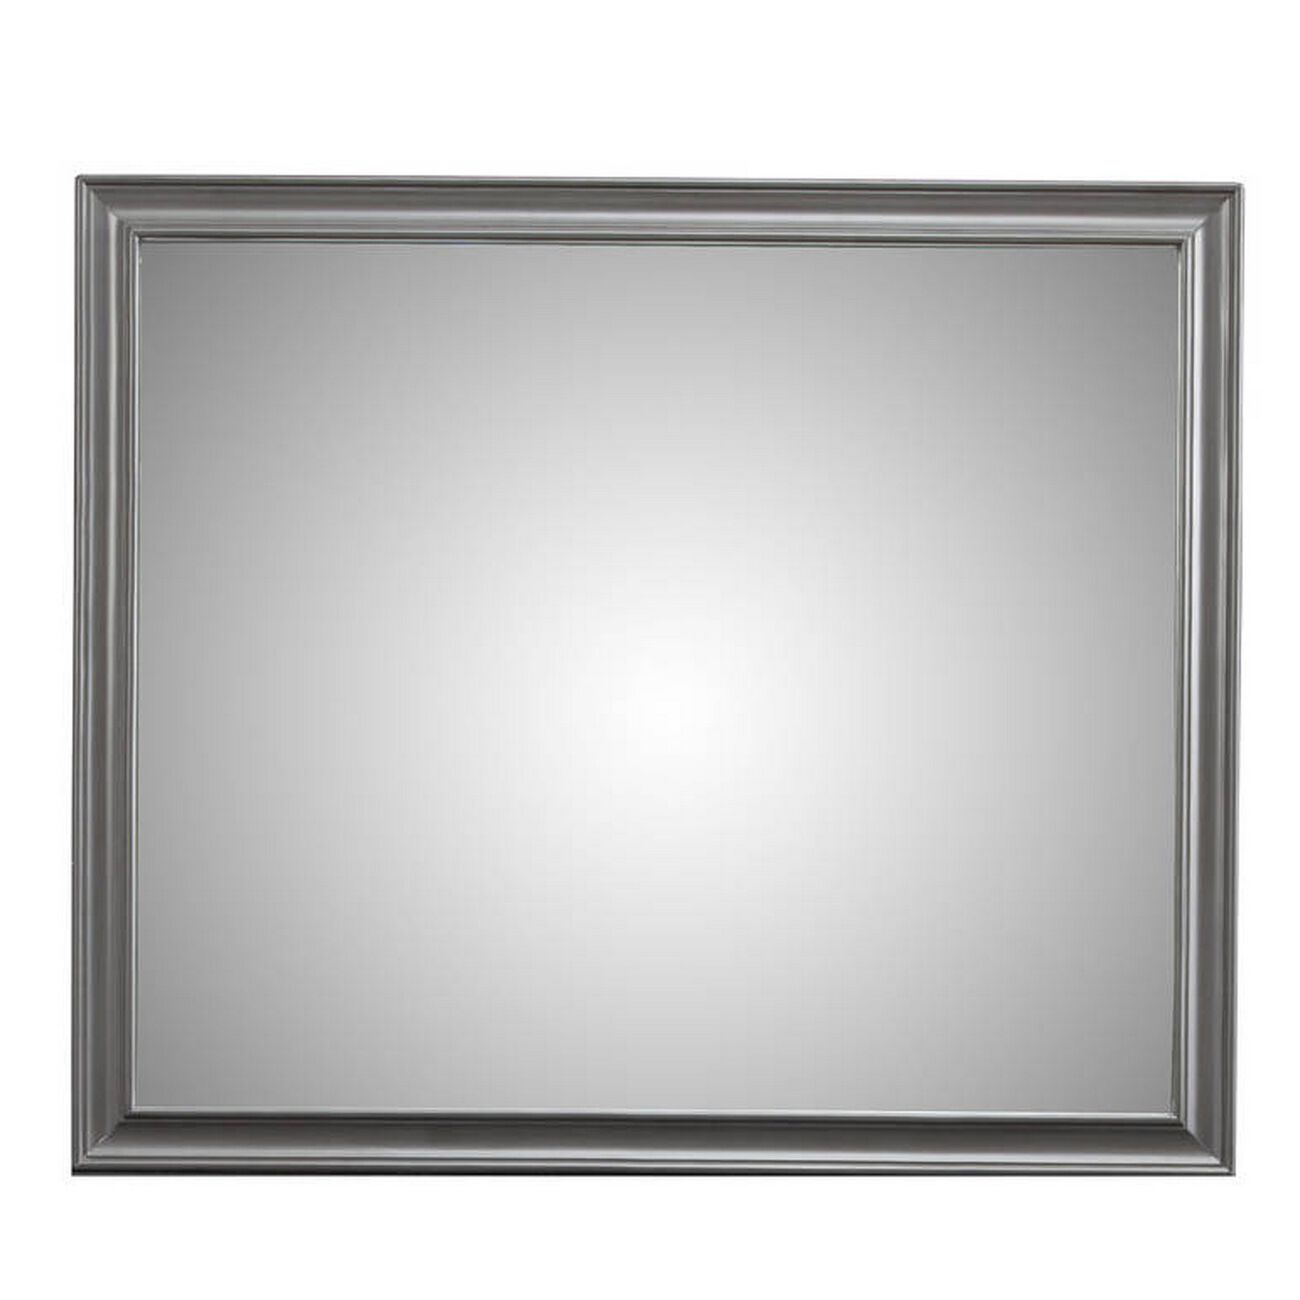 Transitional Style Rectangular Molded Mirror with Wooden Frame, Gray